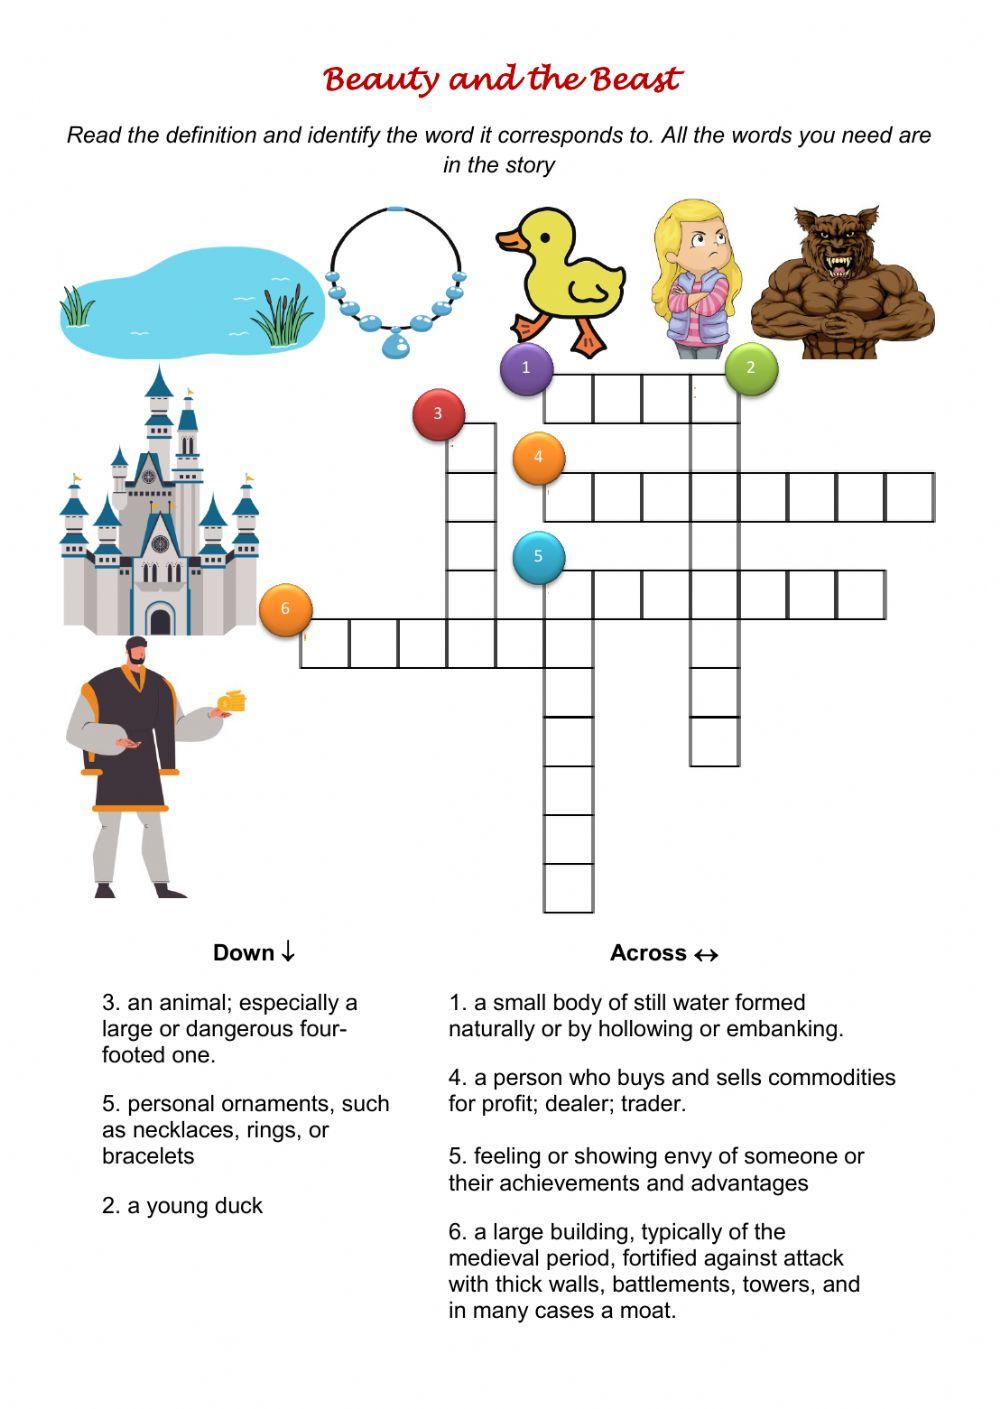 Beauty and the Beast Crossword Vocabulary